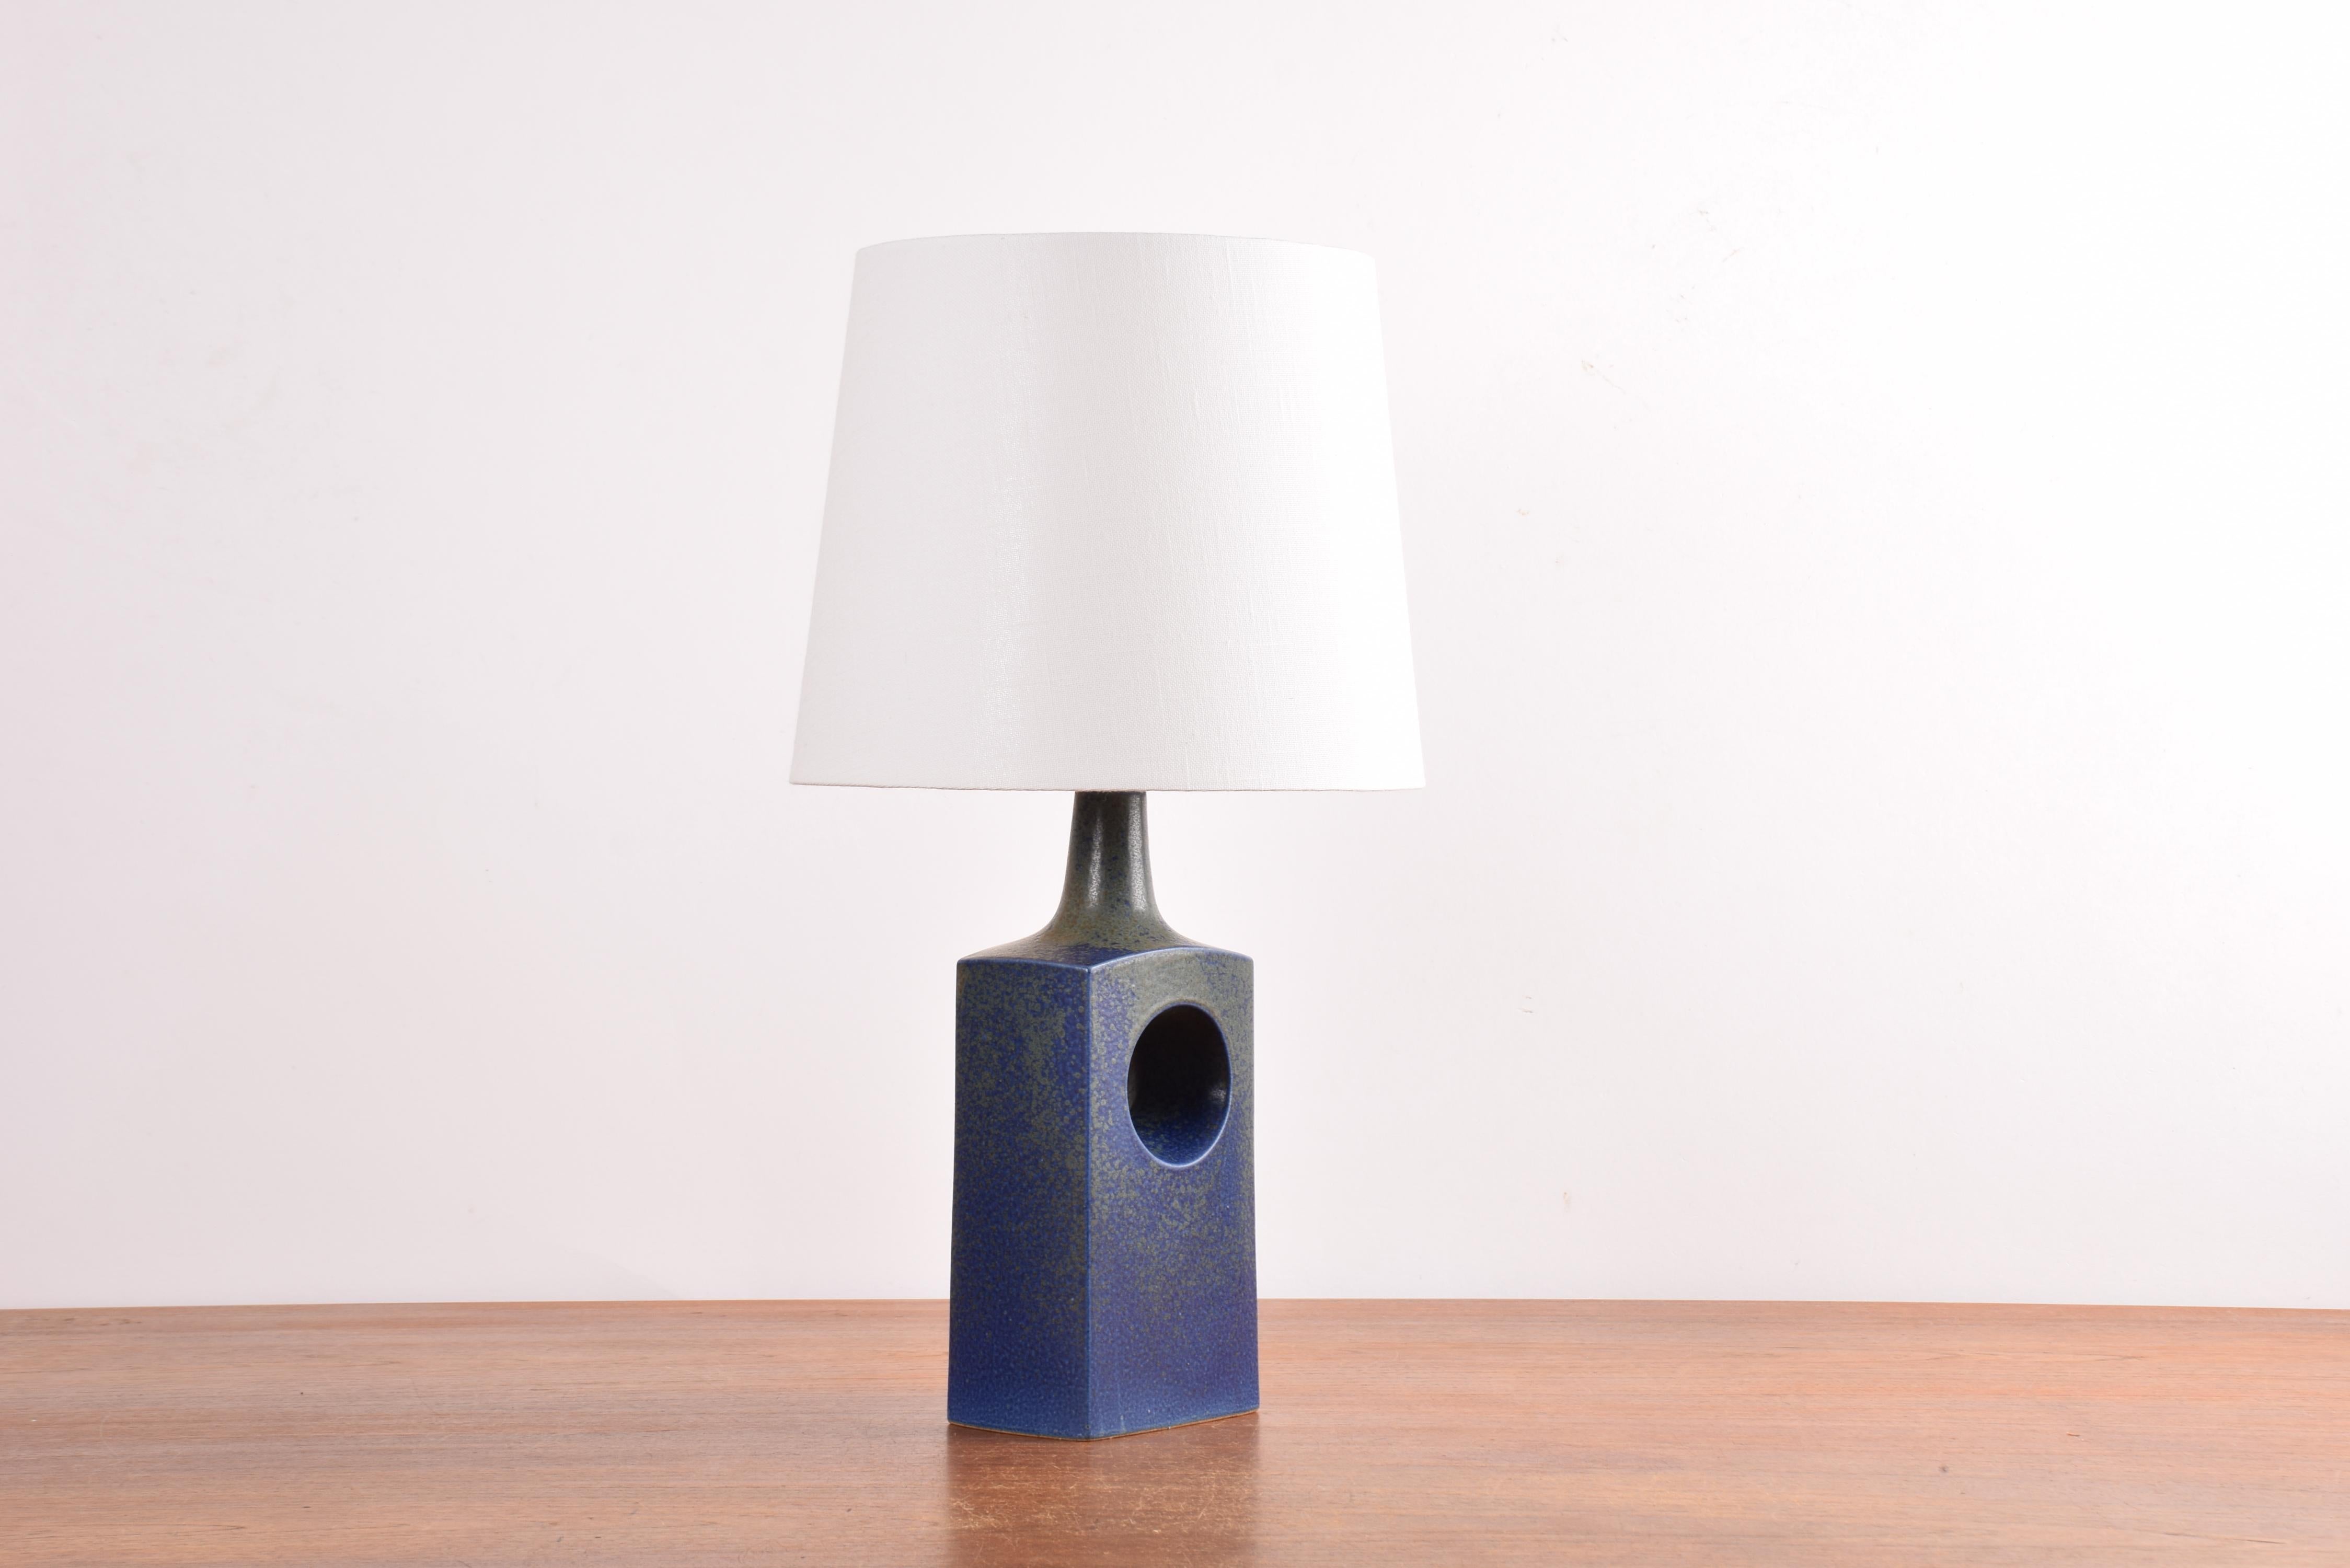 Midcentury Danish table lamp from the ceramic workshop Knabstrup. Made circa 1960s.
This lamp is from the Knabstrup Atelier series. The design could be by Richard Manz.

The lamp has an interesting glaze in blue with olive green areas and